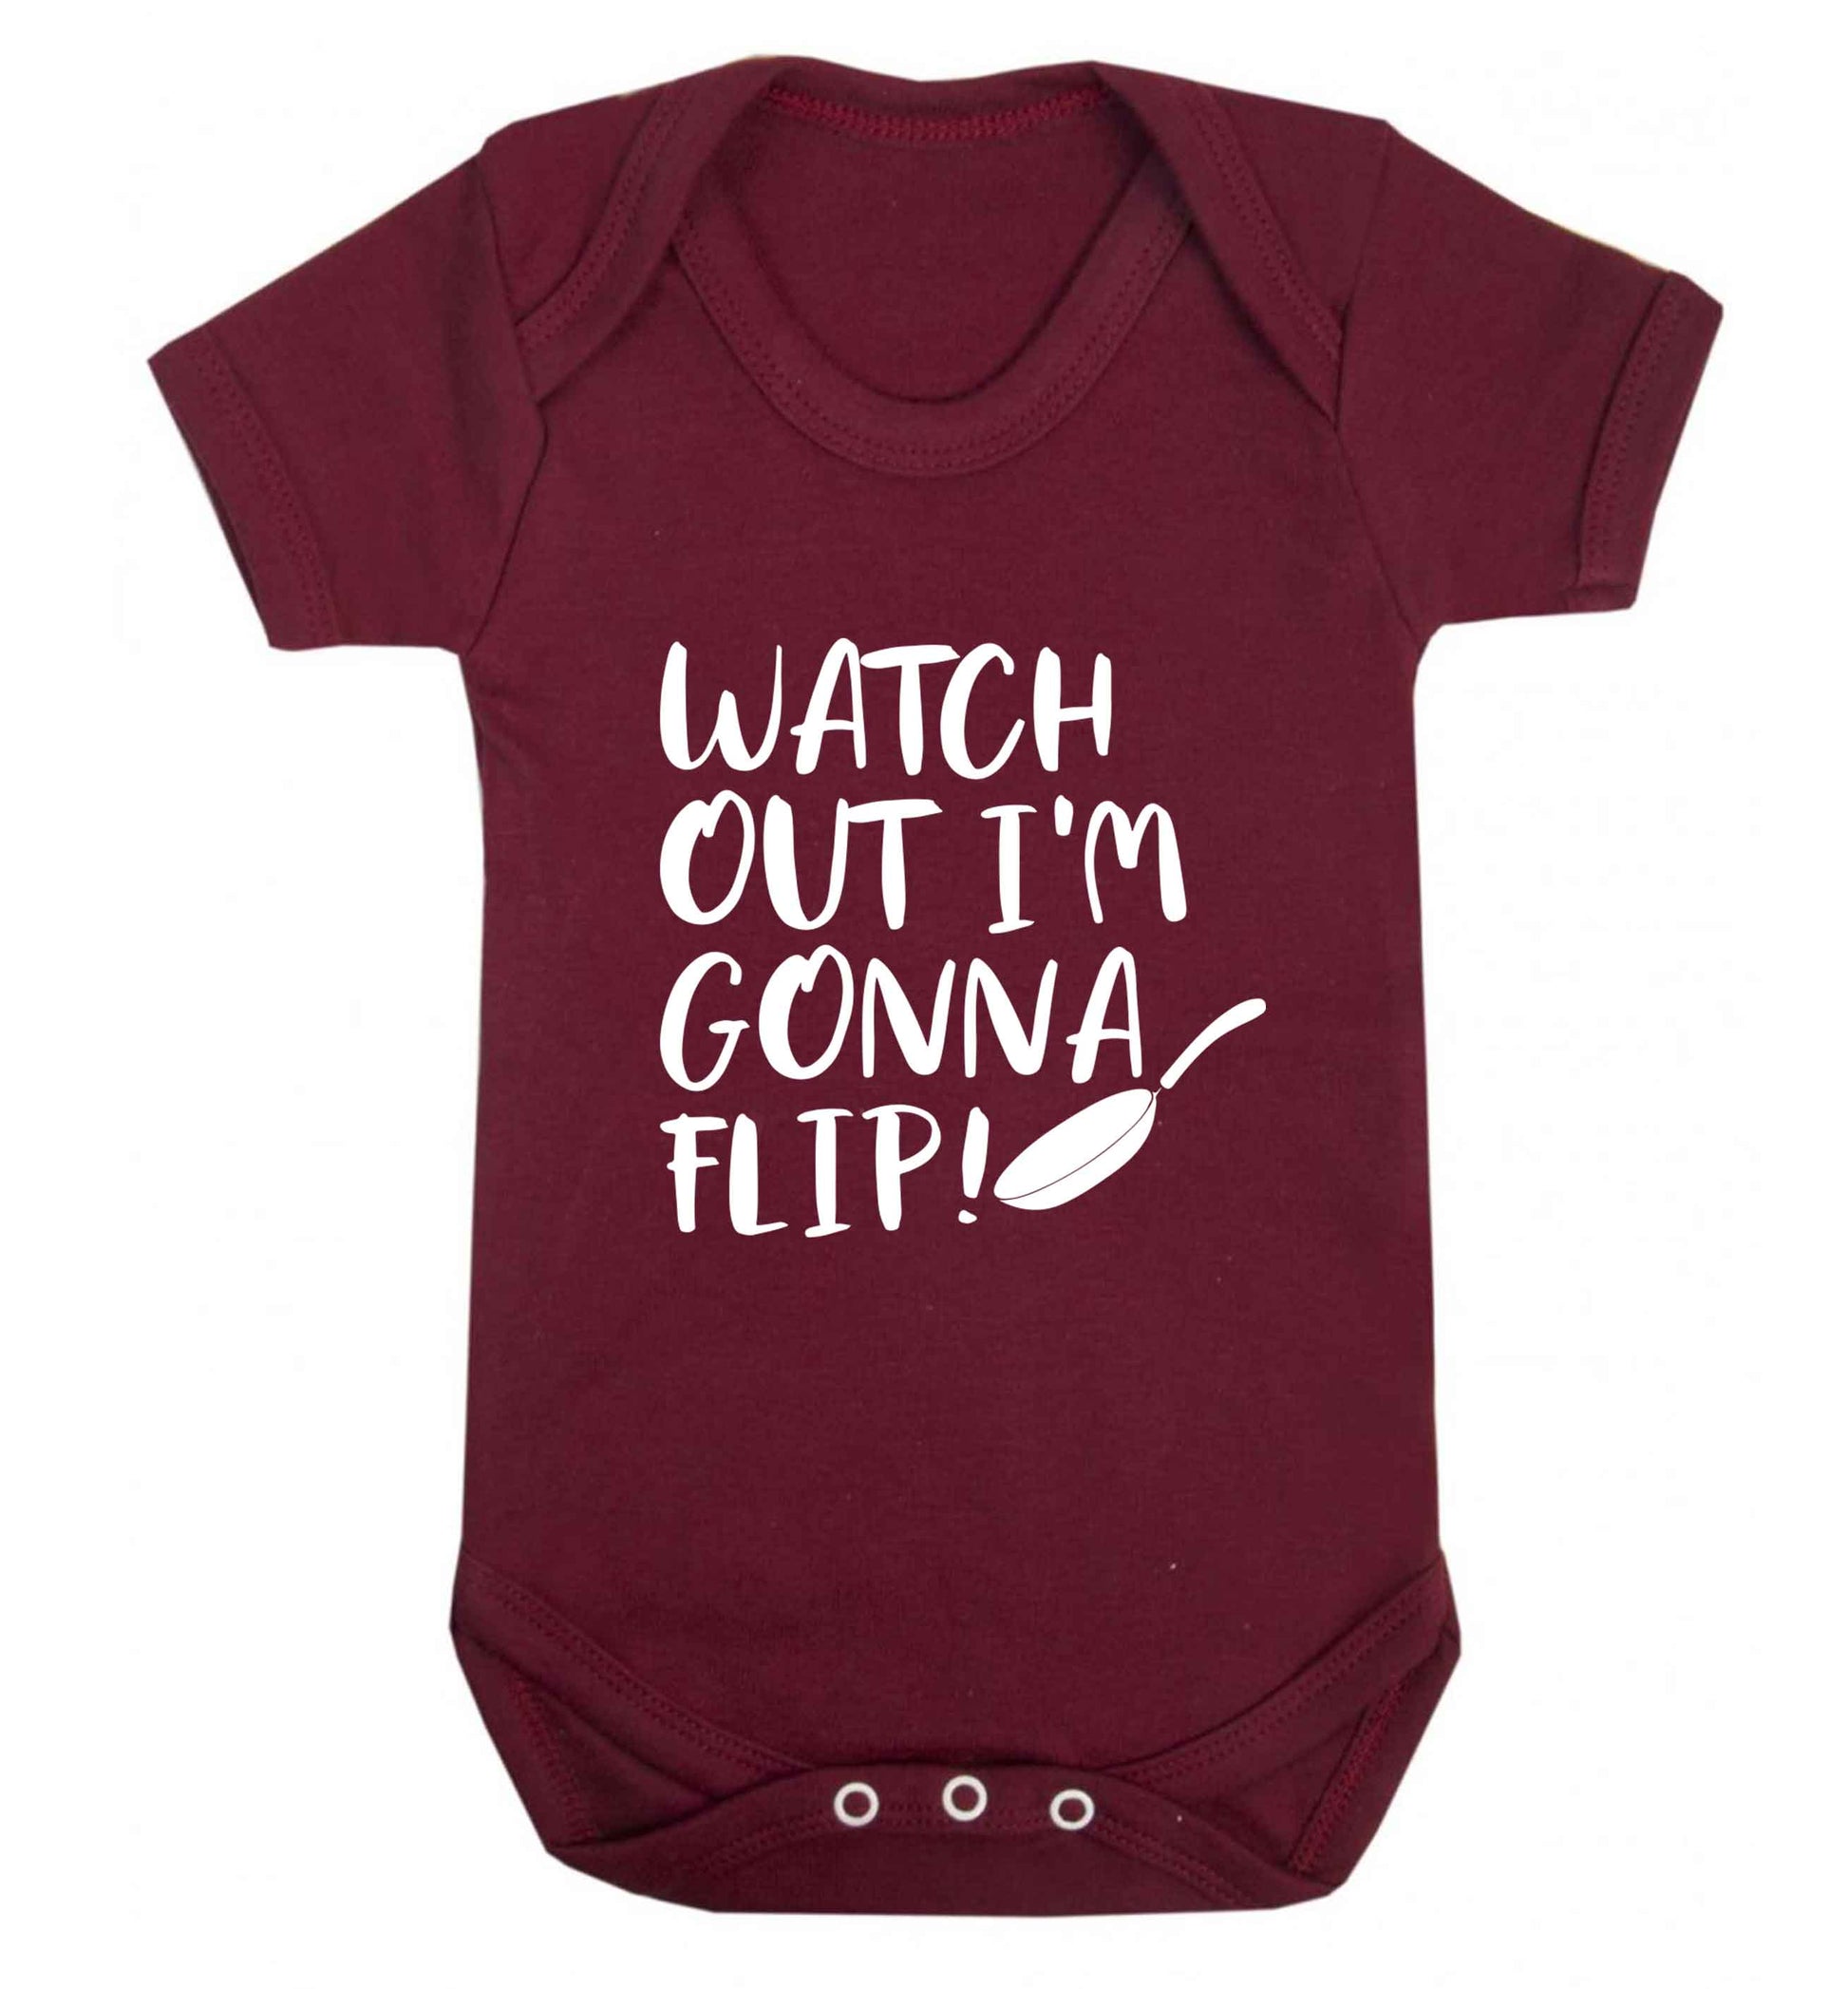 Watch out I'm gonna flip! baby vest maroon 18-24 months